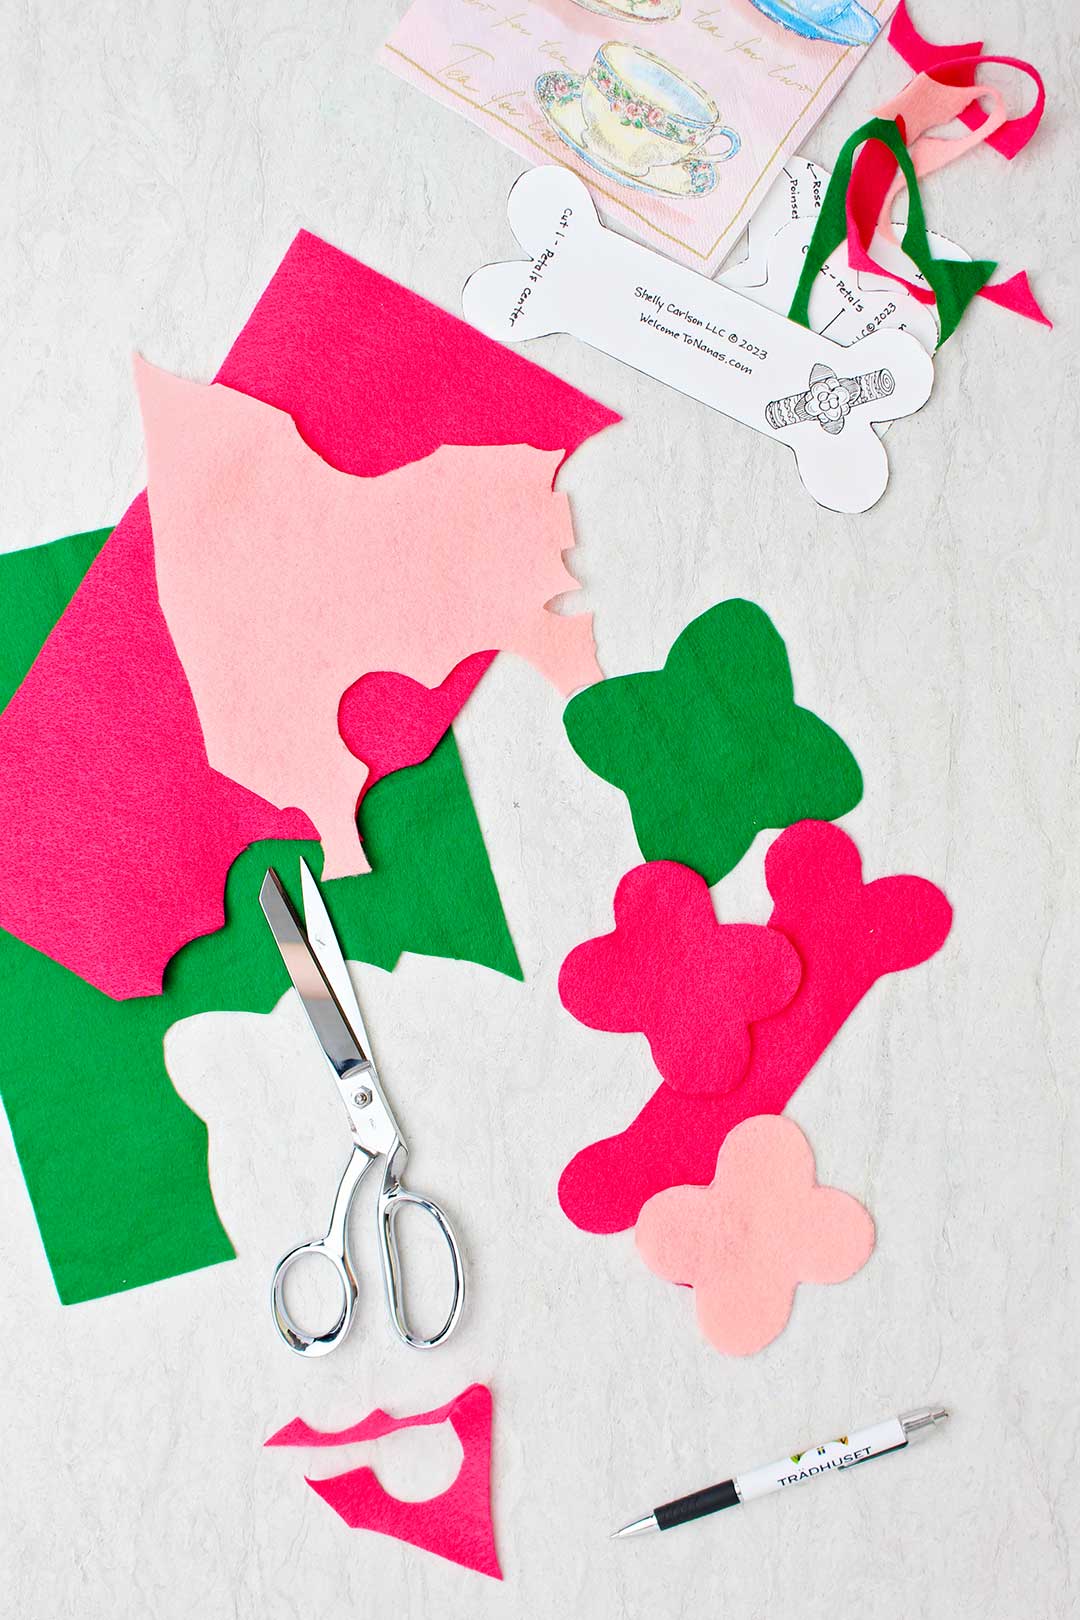 Cut out pieces of felt in green and pink with pattern, pen and scissors resting near by.